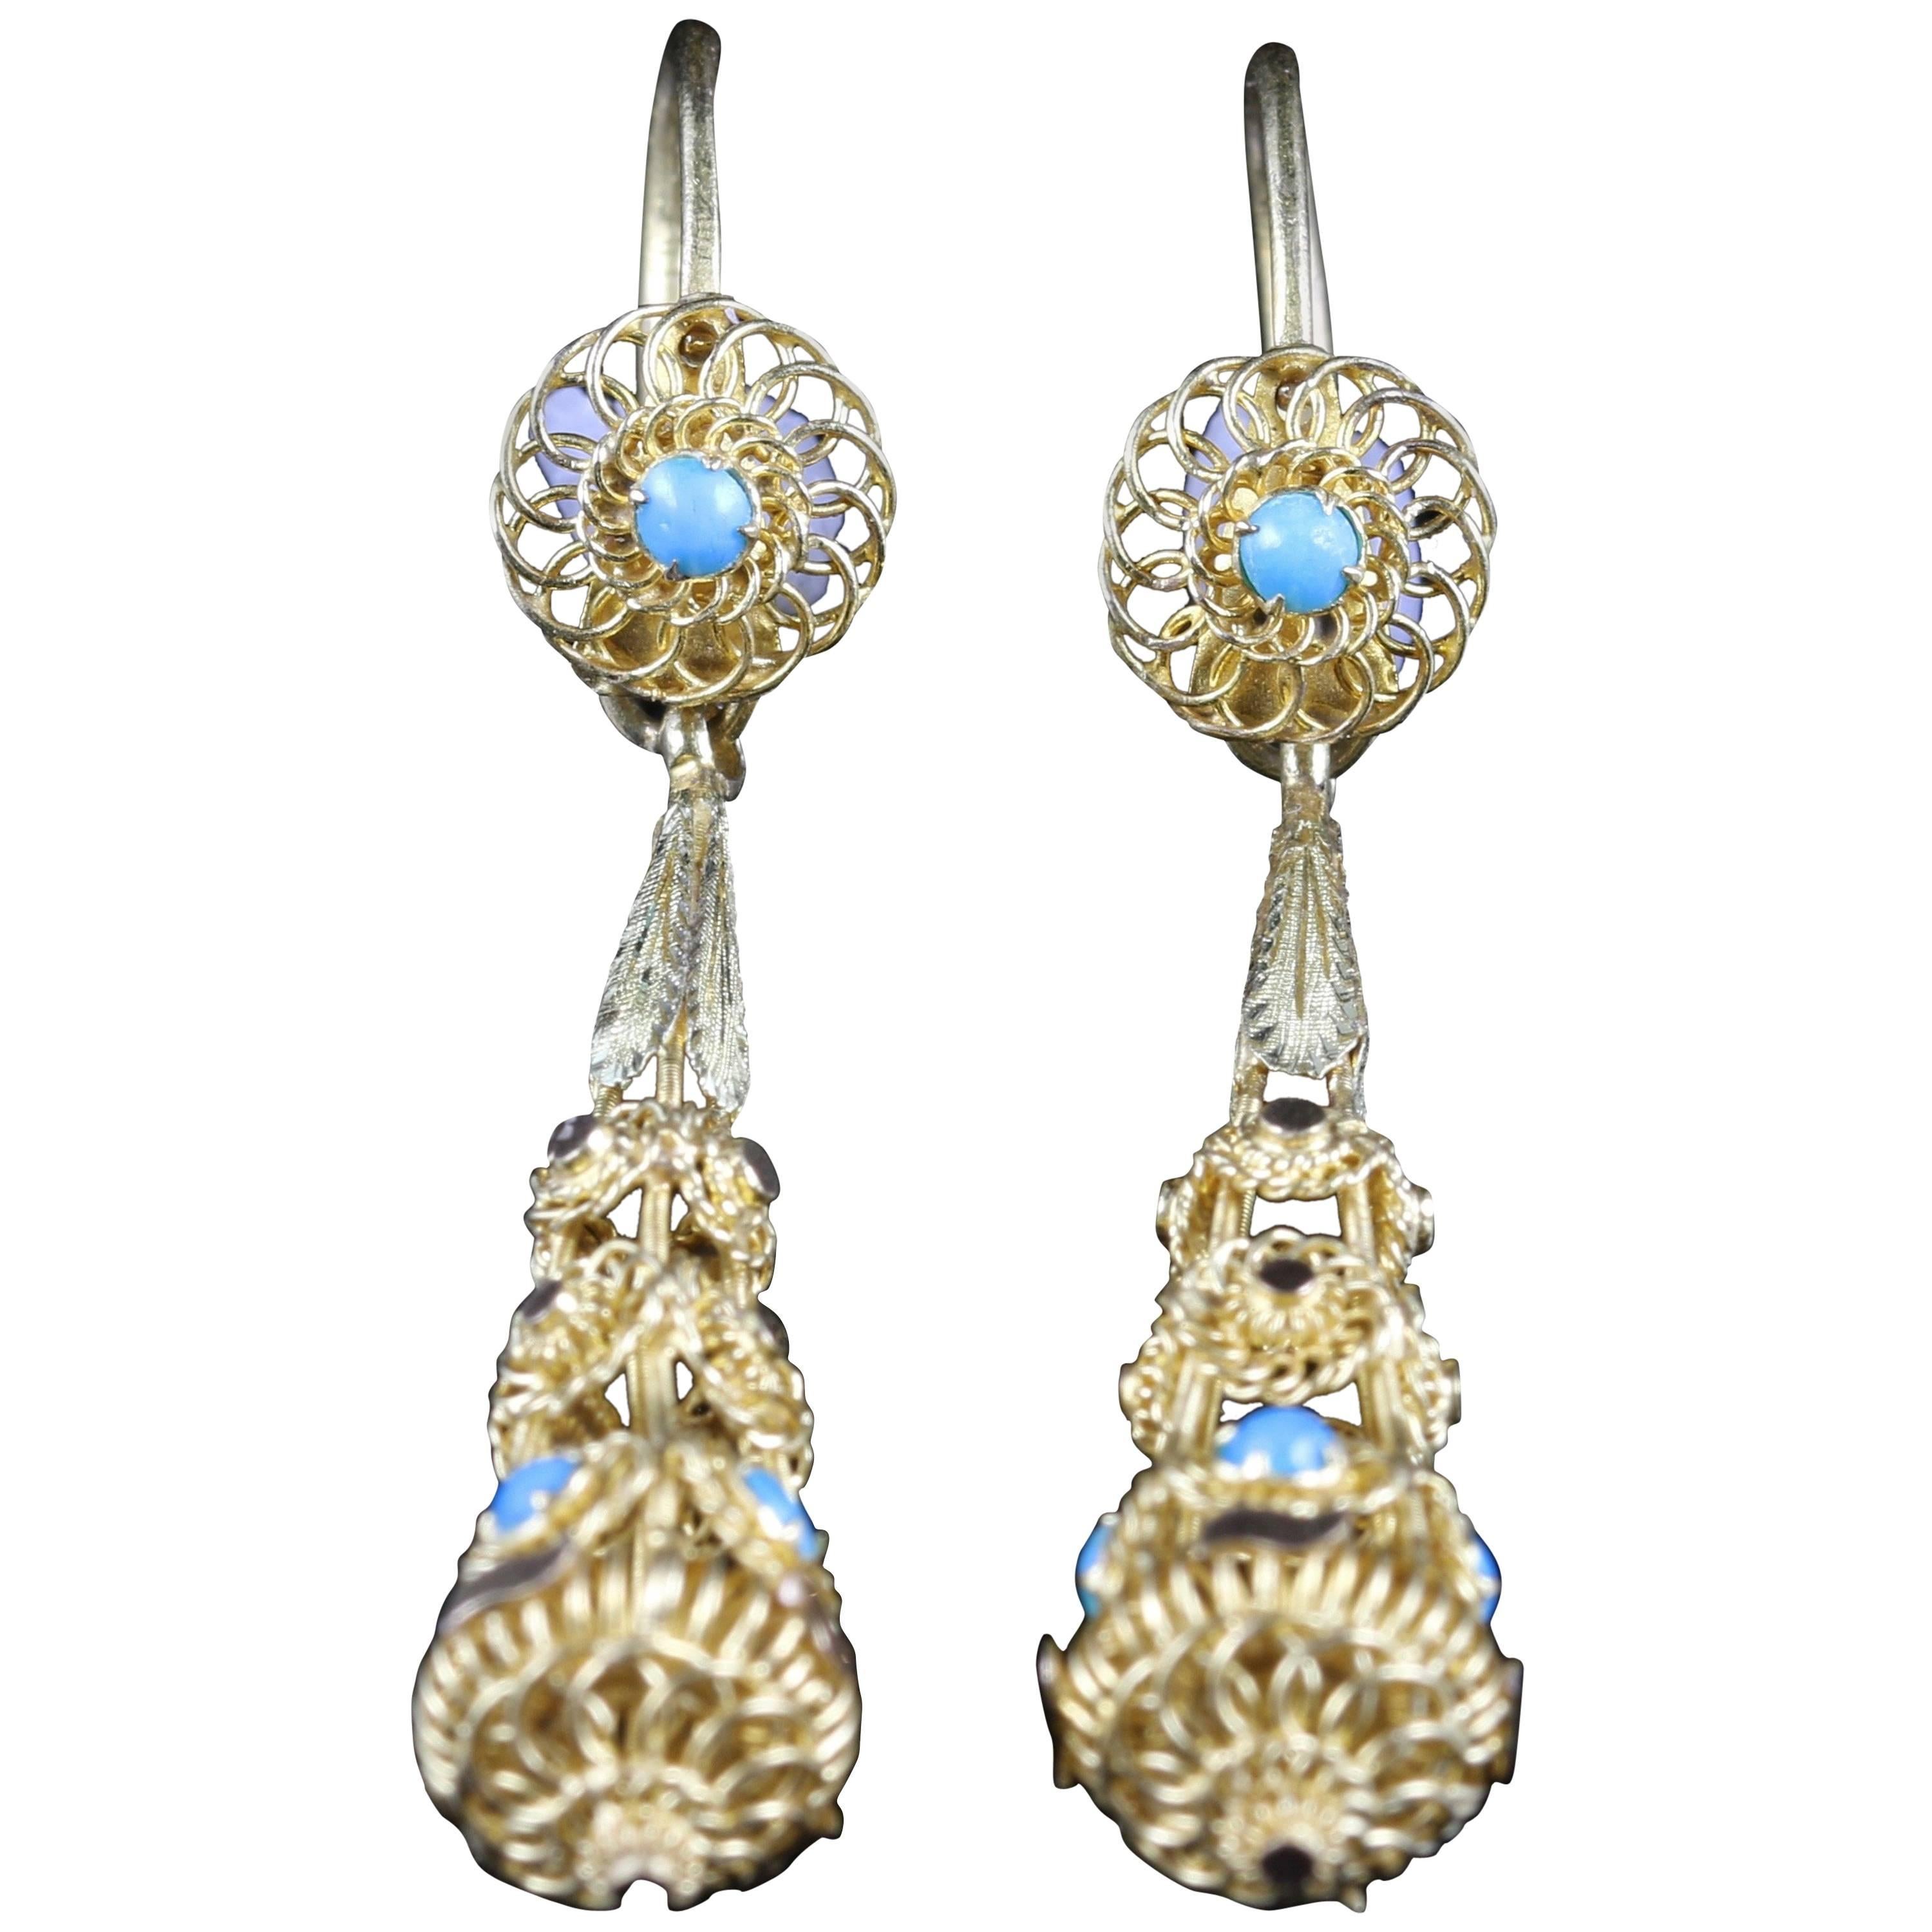 Antique Victorian Turquoise Gold Earrings, Night and Day, circa 1860